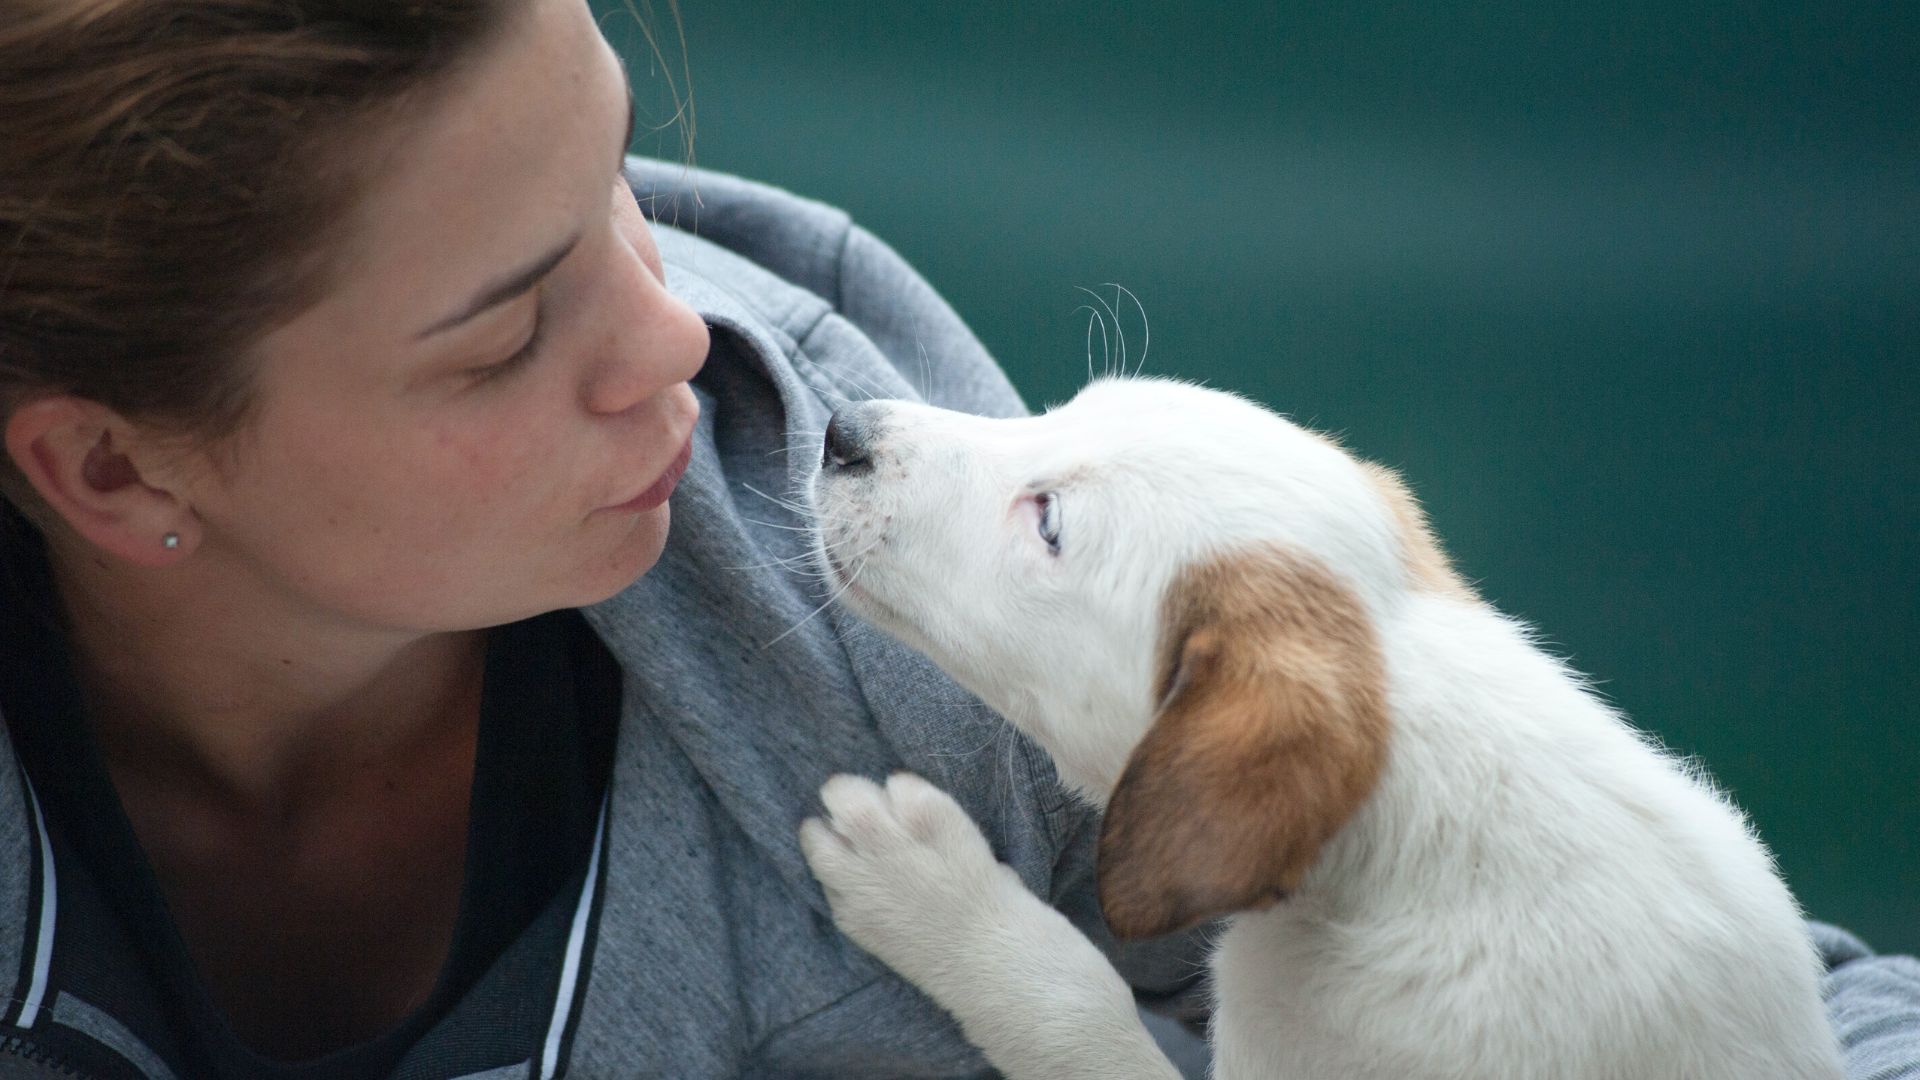 Female Dogs Do Experience Periods. Here’s What You Need To Know About It.